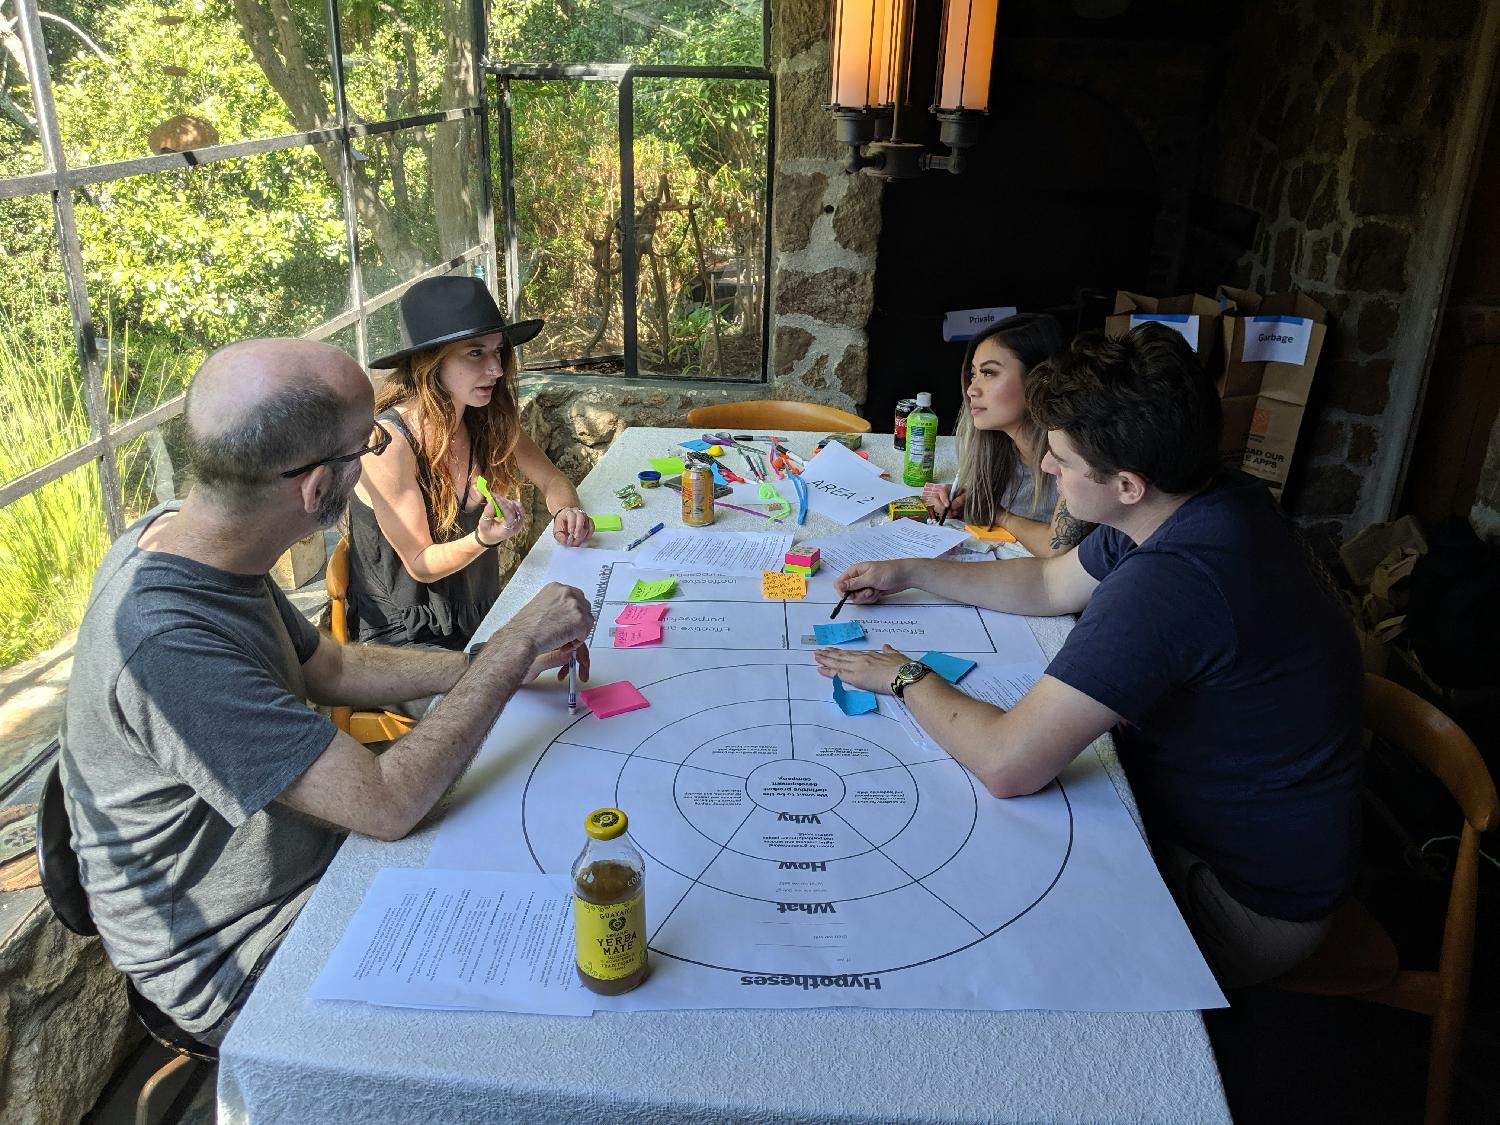 A strategy session during our 2019 offsite